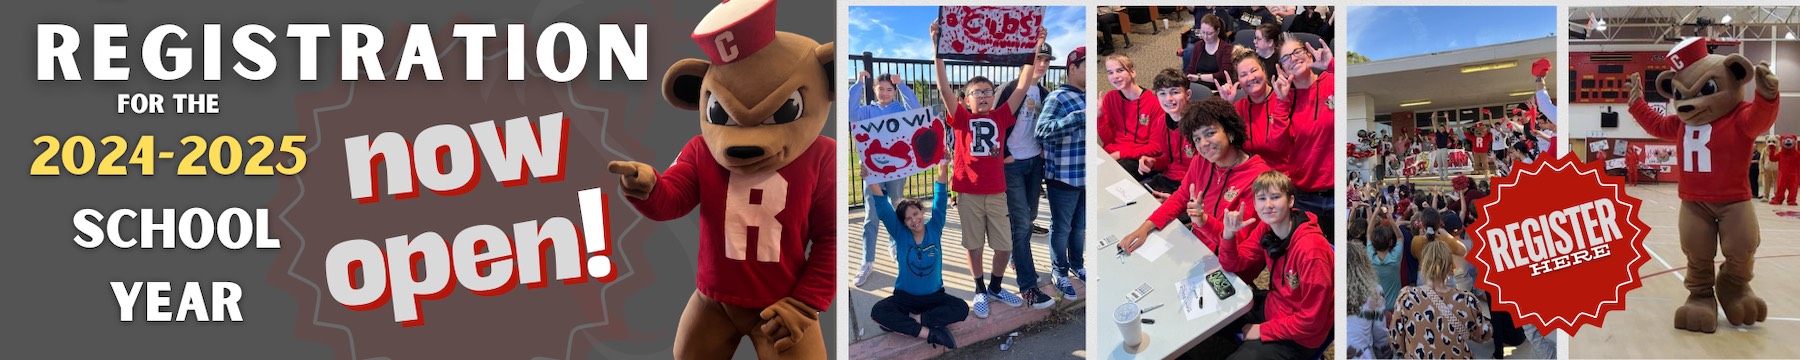 Register here for the 2024-2025 school year now.  Image description: A Cub mascot pointing to register on the photo collage of students in various school settings